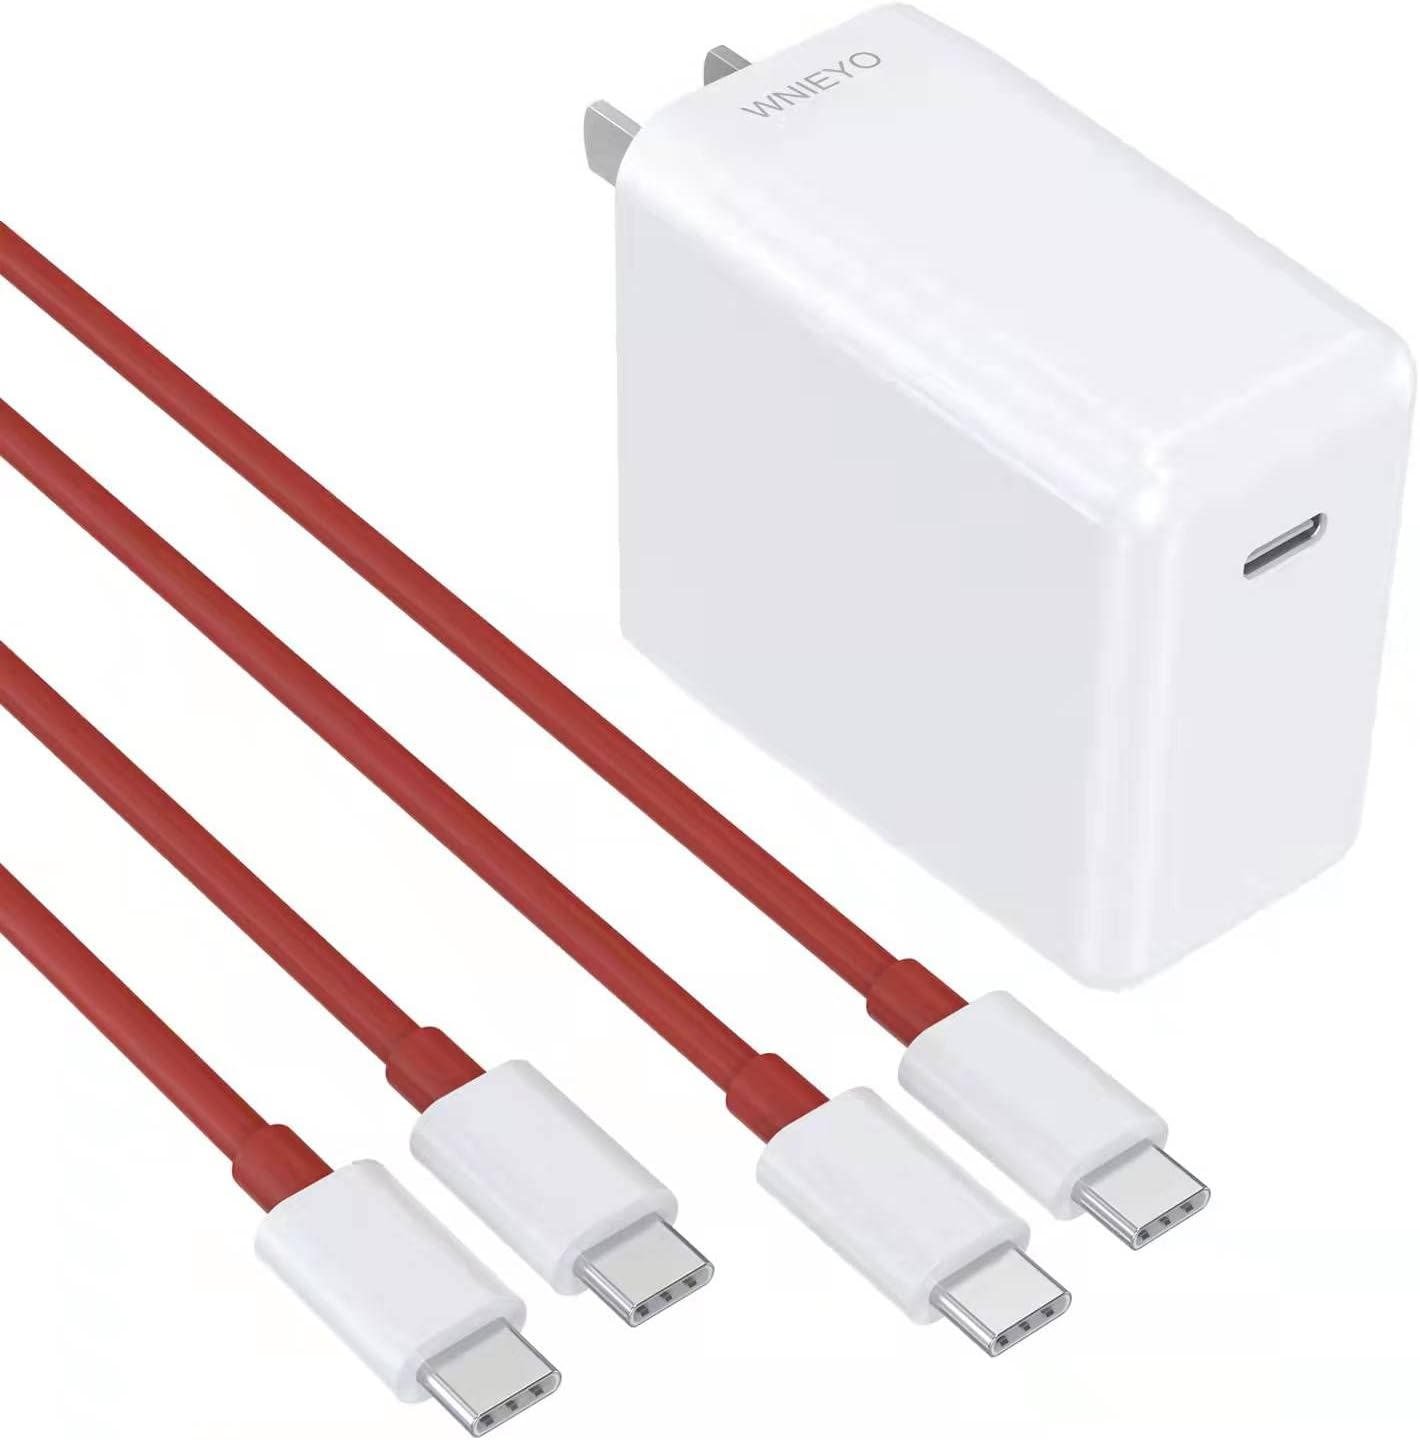 Warp Charger for 9R/9/9 Pro, Oneplus Warp Charger 65w Set Compatible with 8 Pro/8T/8/7 Pro/7T/7T Pro, Include 65w Power